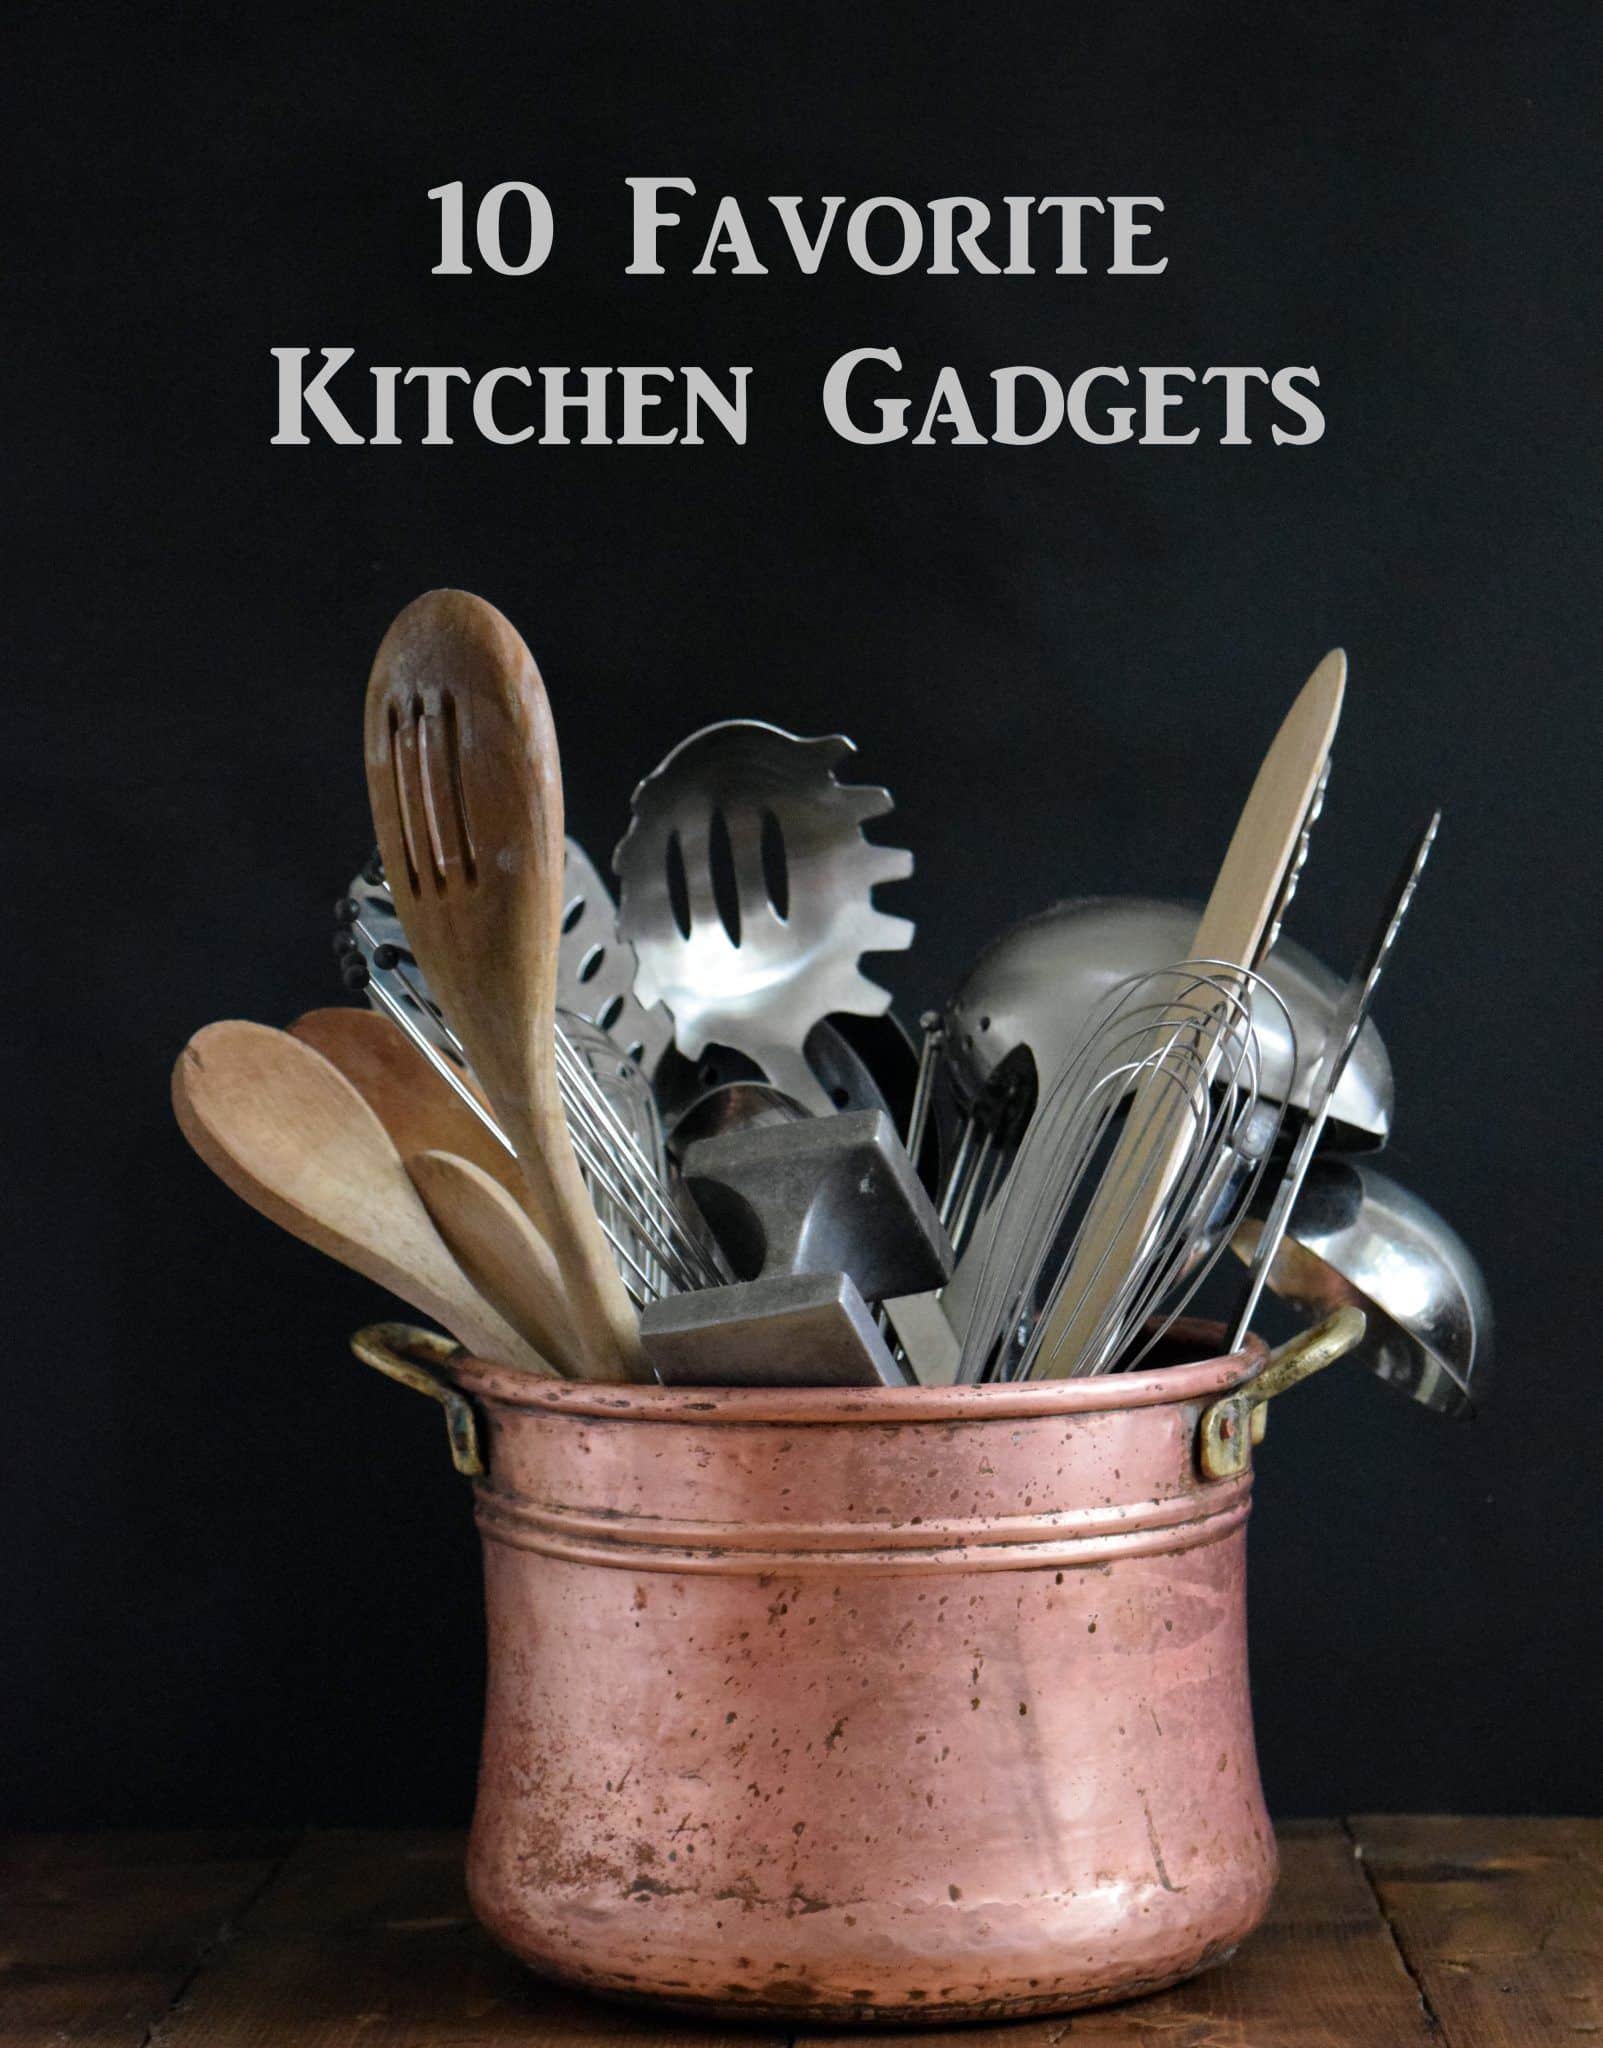 Ten of my Favorite Kitchen Gadgets, tools and appliances; why I like them and how I use them. These tools would be great gifts for the cook in your world.